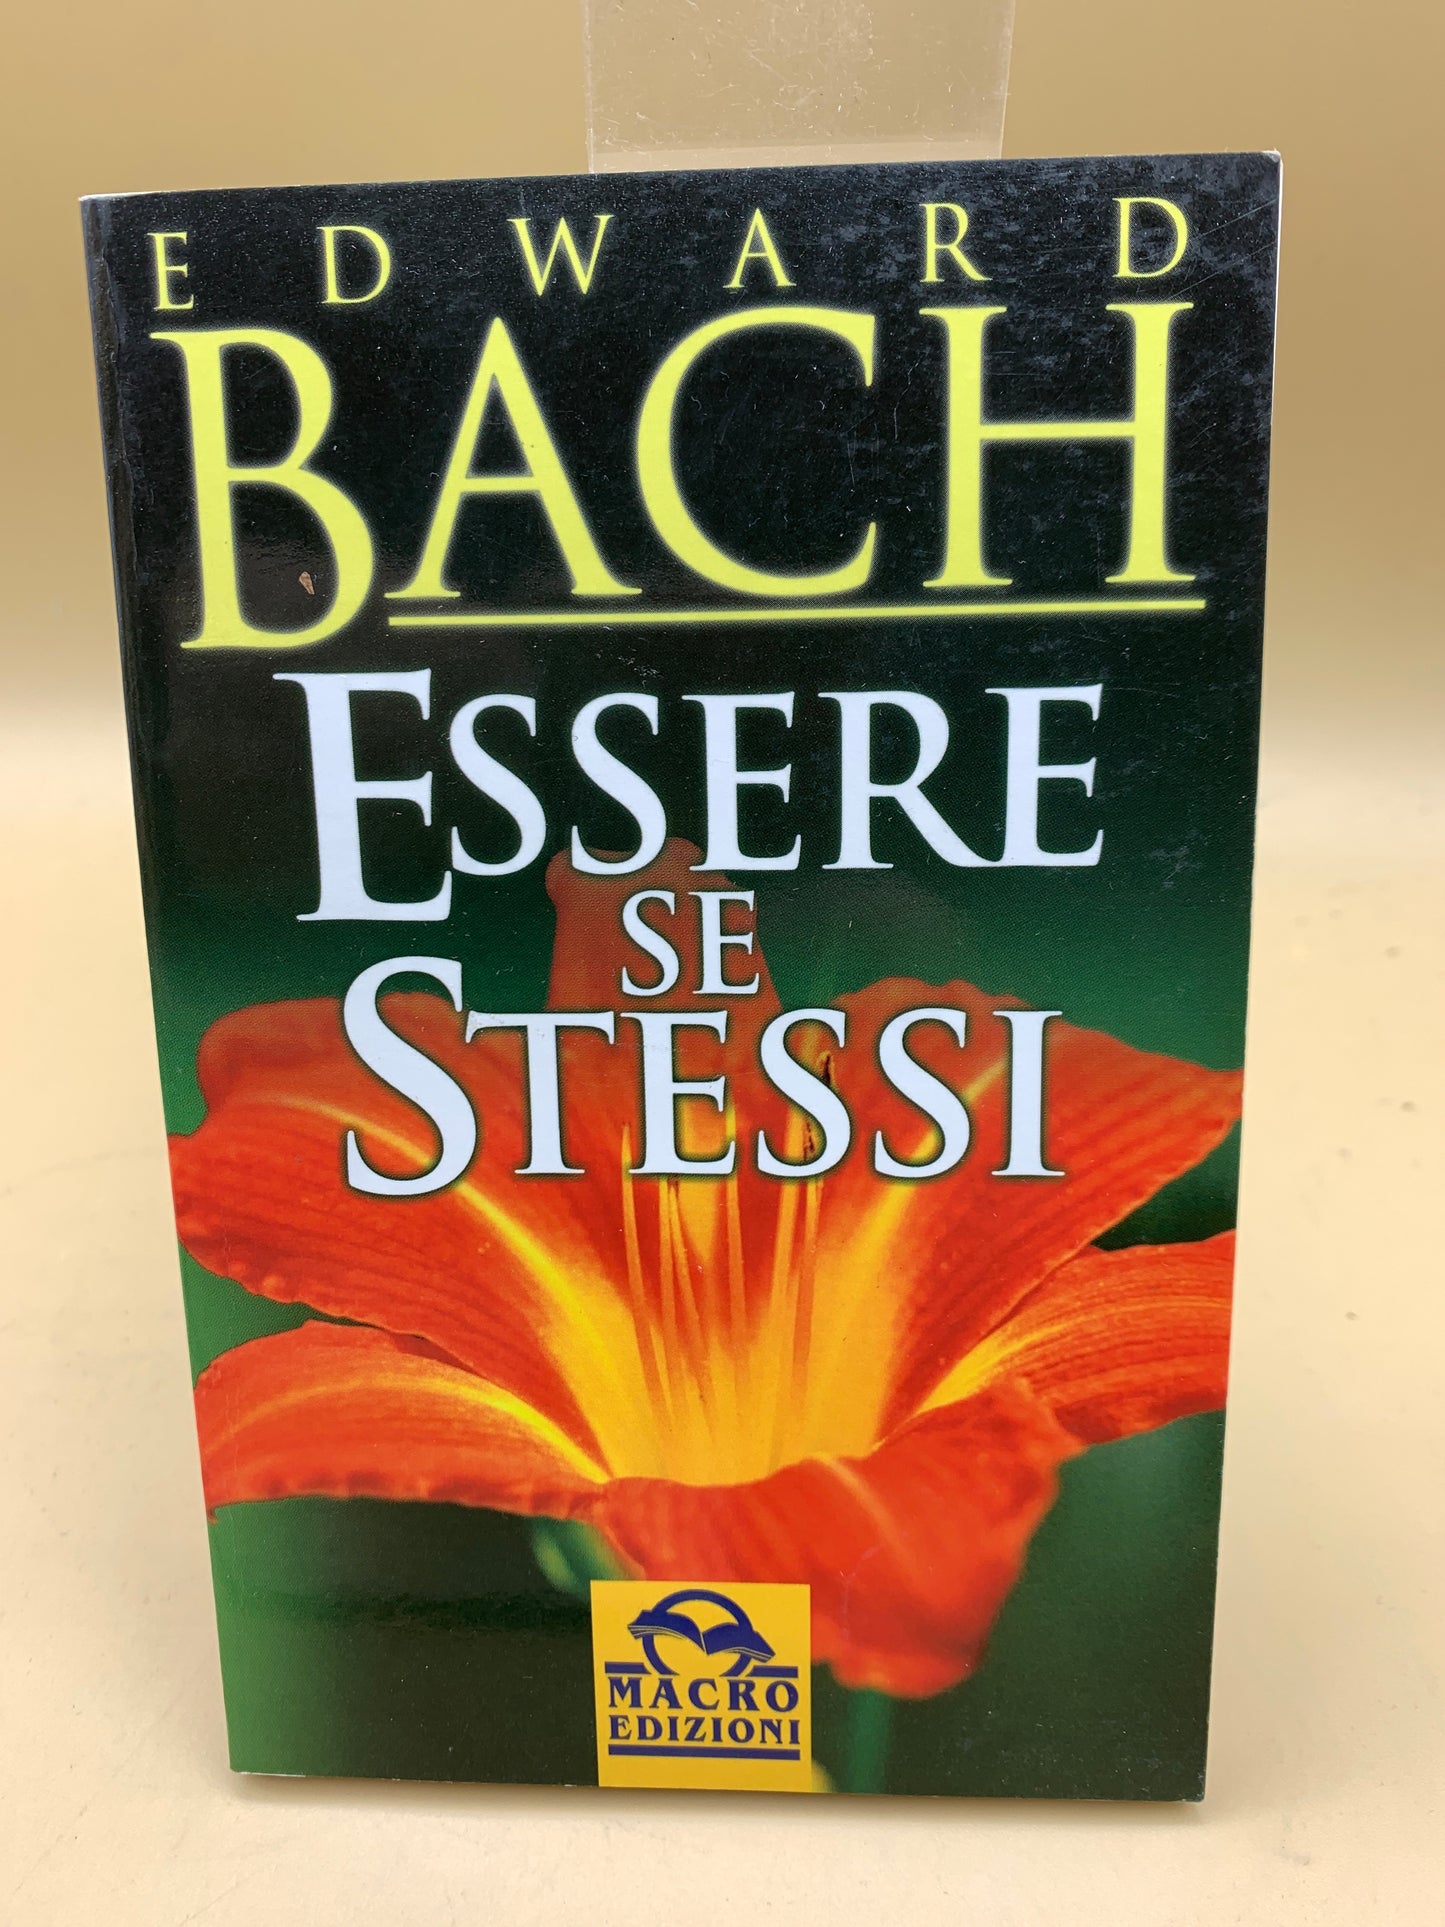 Being yourself - Edward Bach